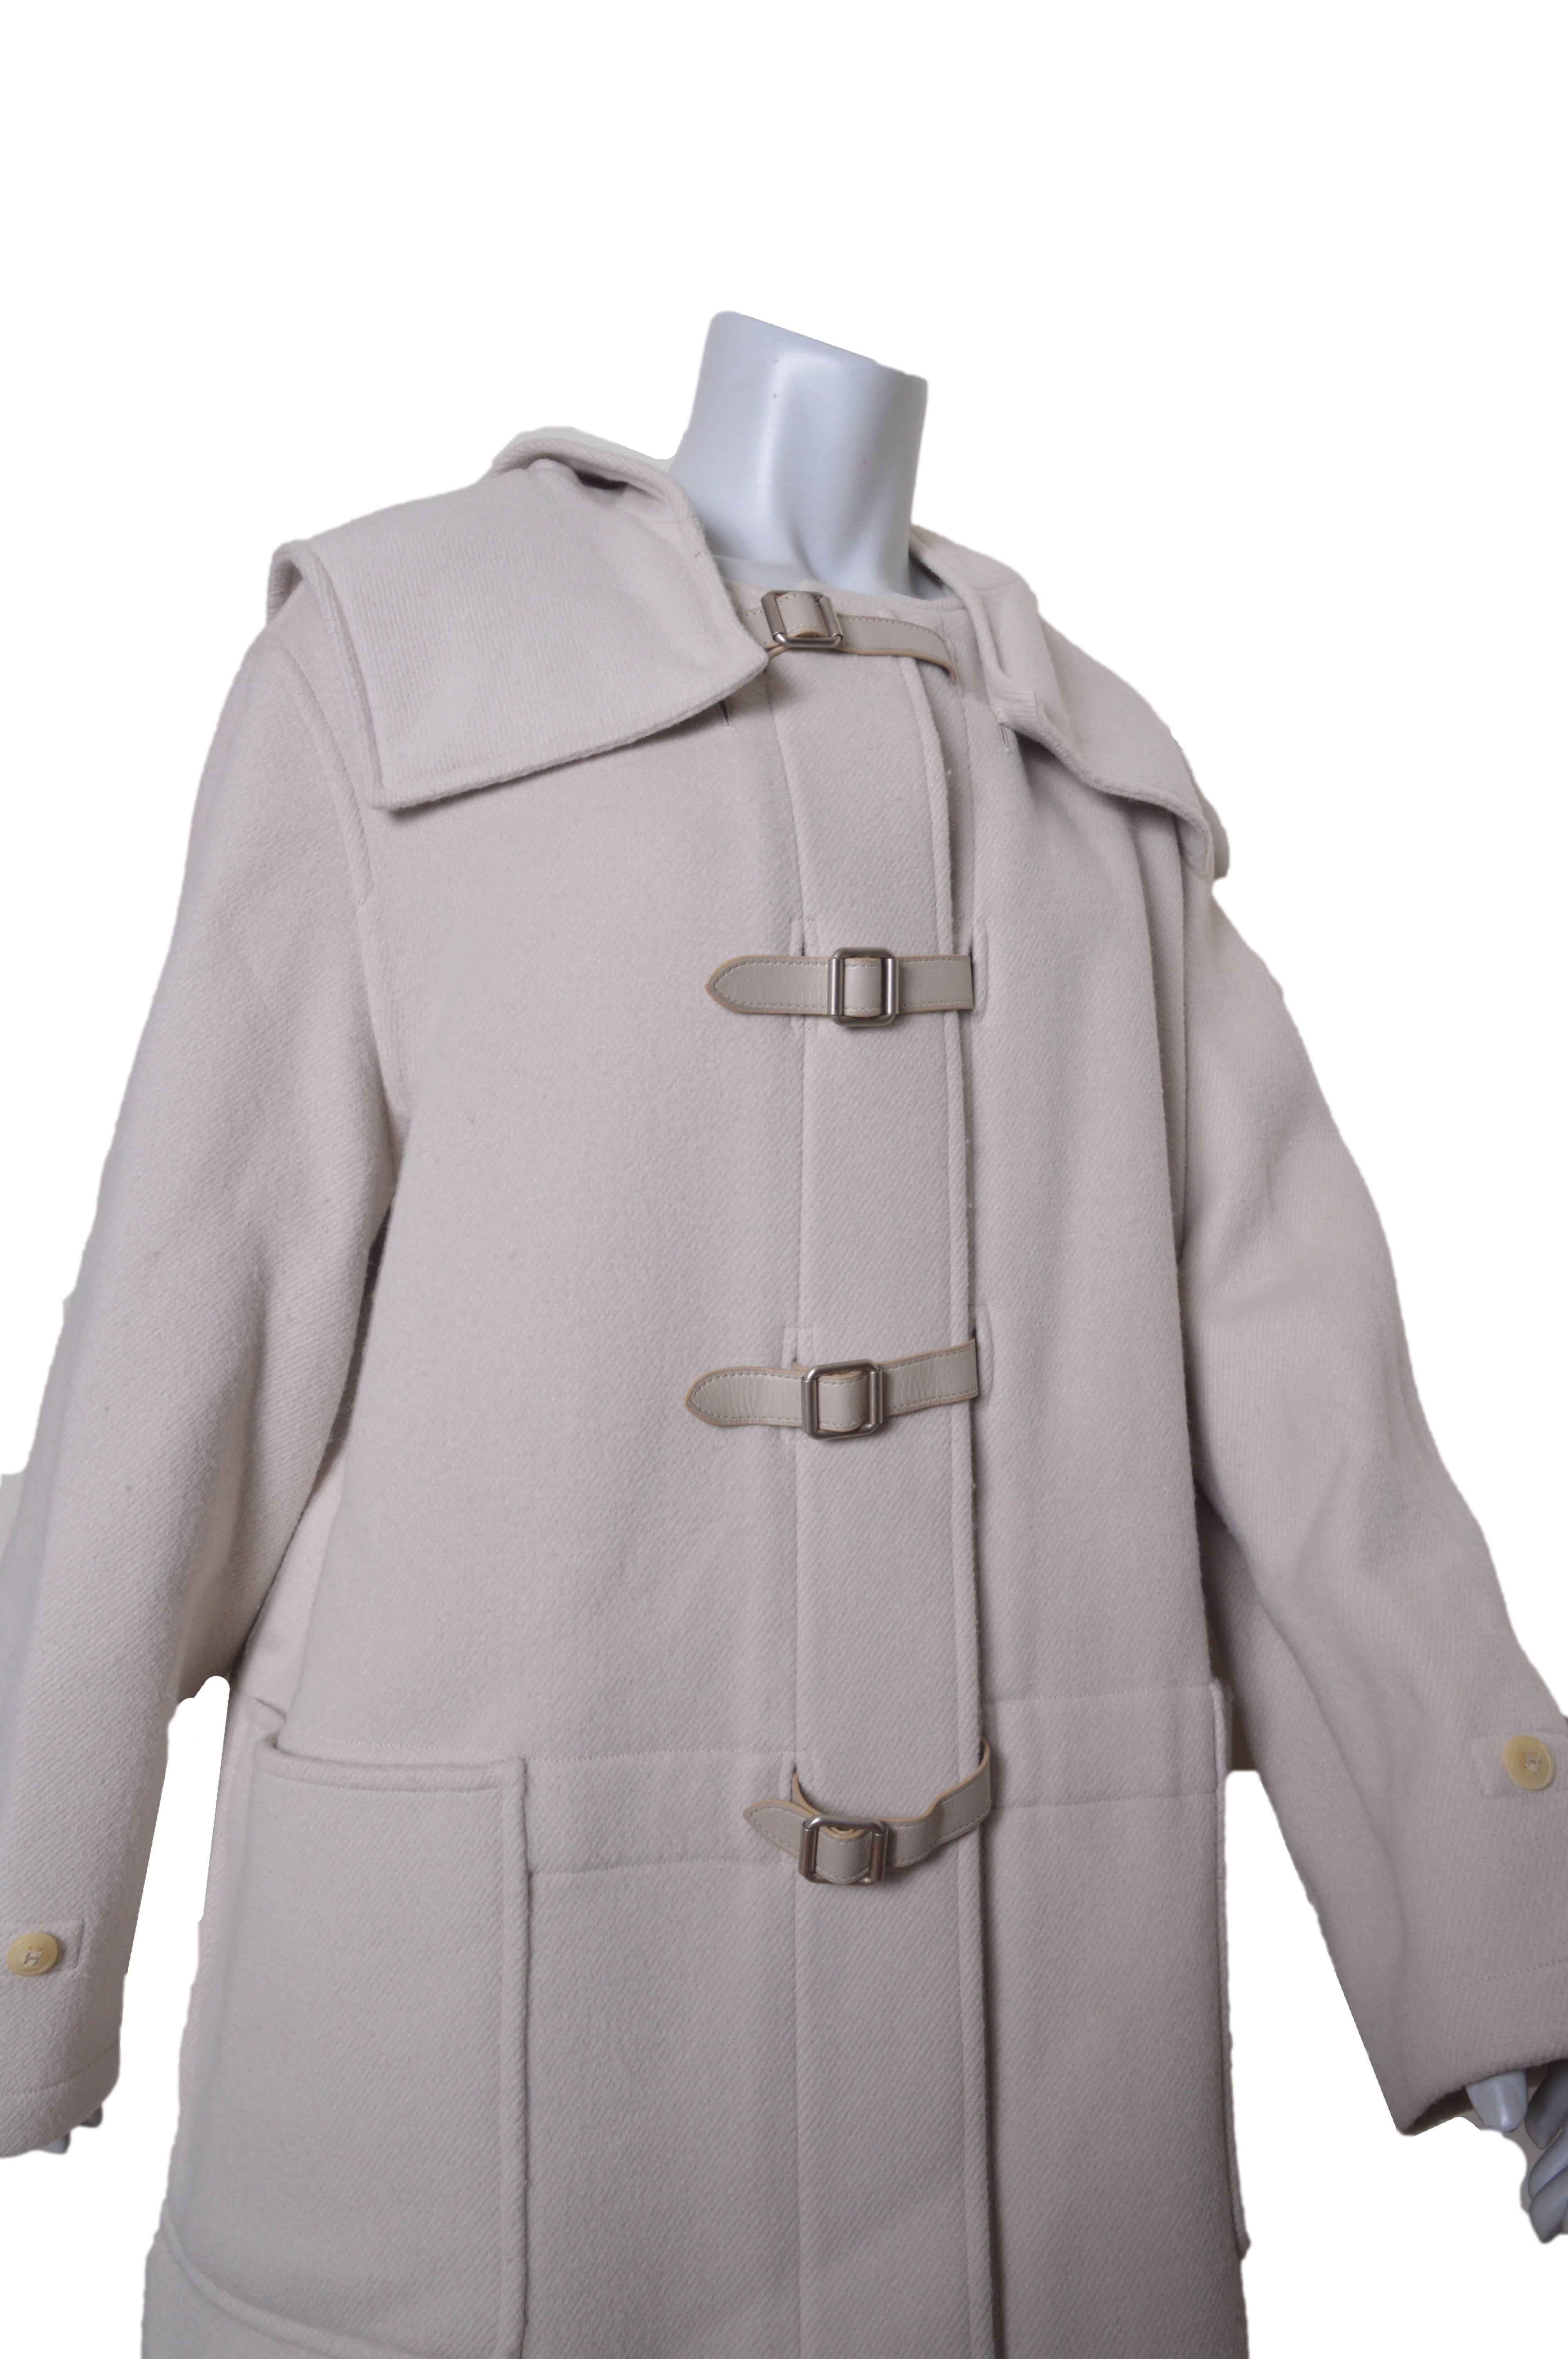 Lush Hermes coat.
Color is a very pale gray/cream.
Wool with cashmere.
Detachable hood.
Leather belt and buckle closures.
Huge front bucket pockets.
Shoulder amulets.
Unlined.
Tagged a size 44.